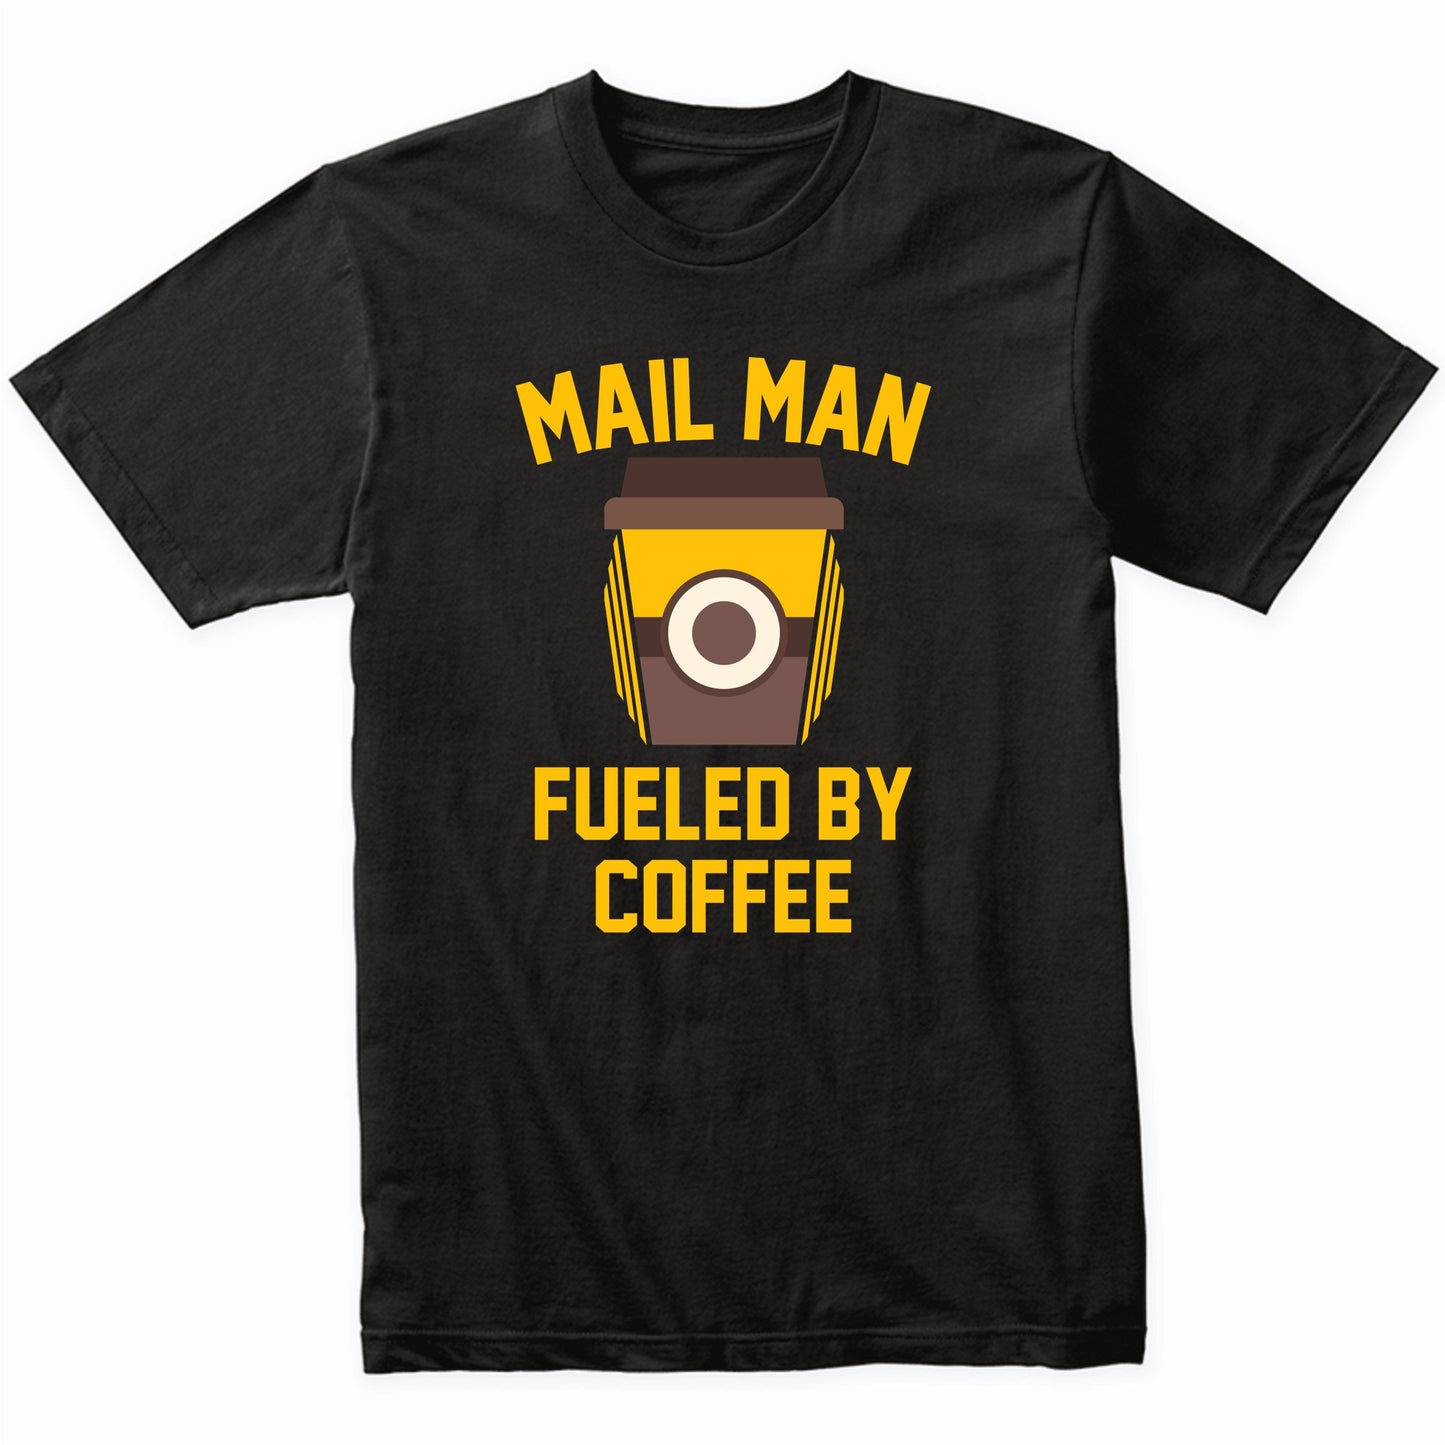 Mail Man Fueled By Coffee Funny Shirt